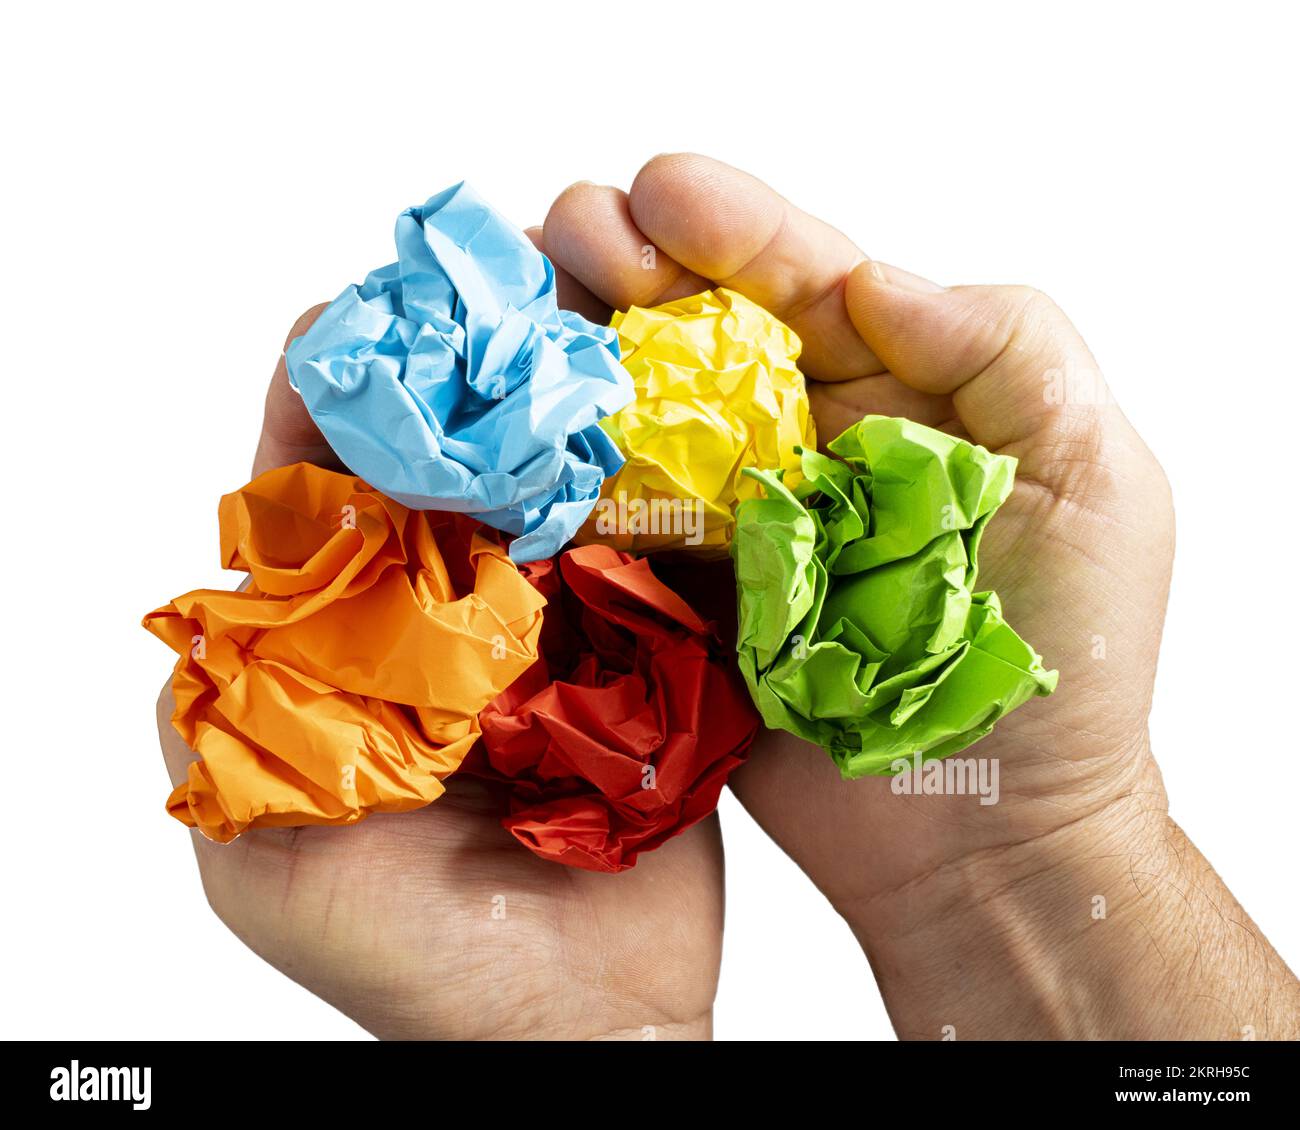 a few sheets of crumpled colored paper in the hands Stock Photo